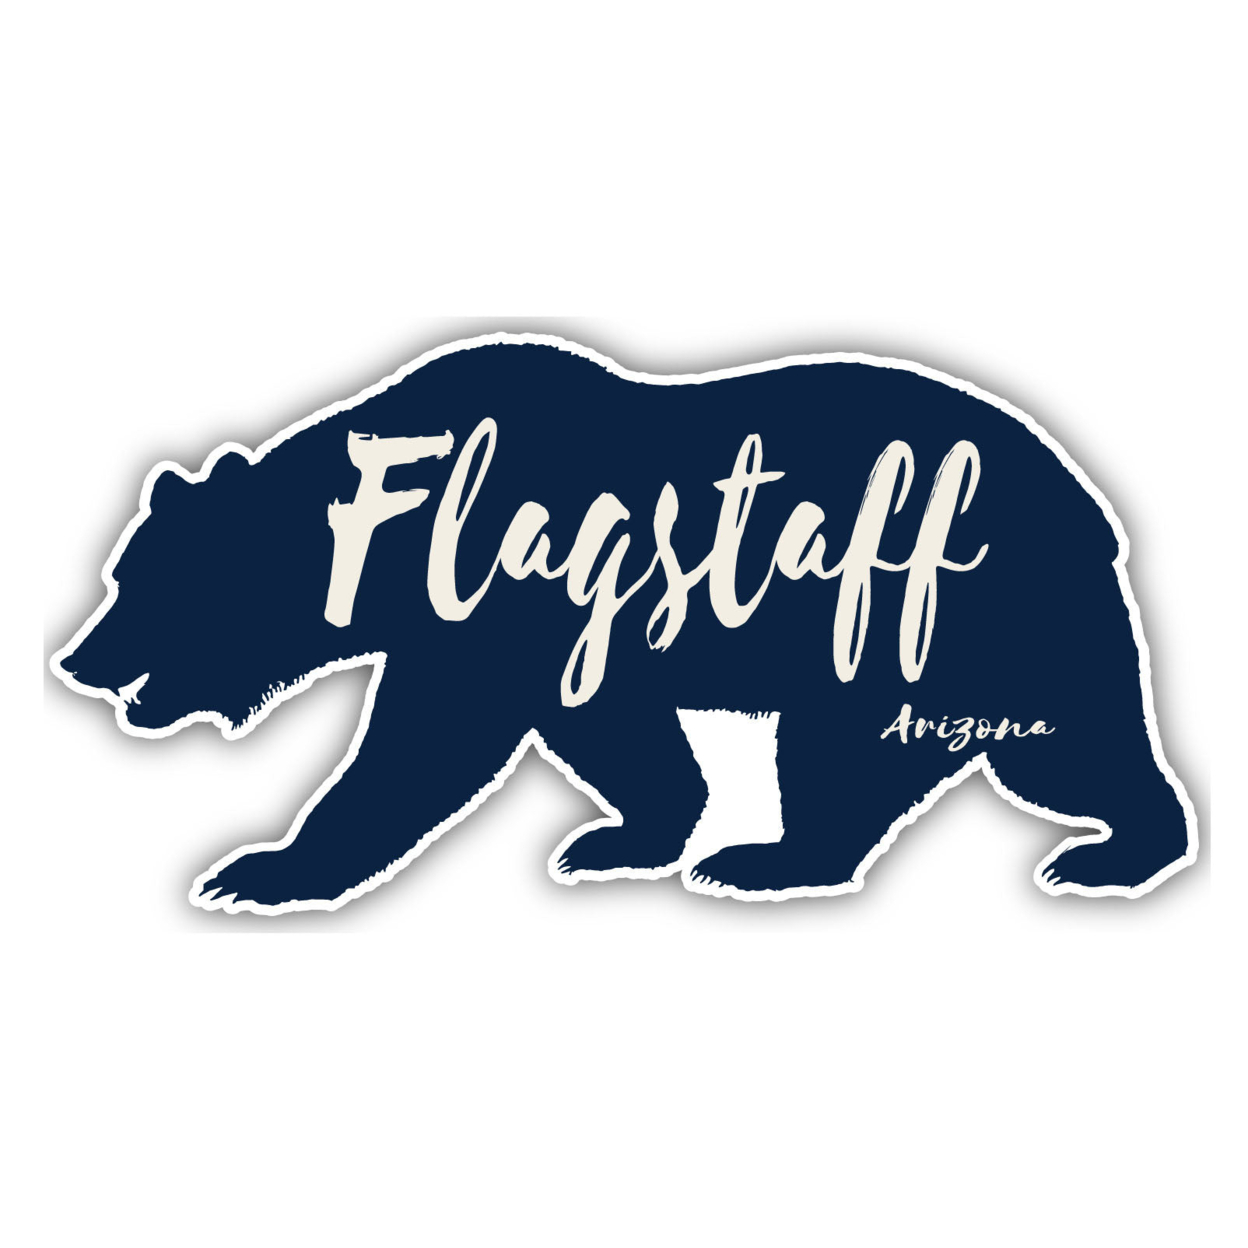 Flagstaff Arizona Souvenir Decorative Stickers (Choose Theme And Size) - 4-Pack, 10-Inch, Tent